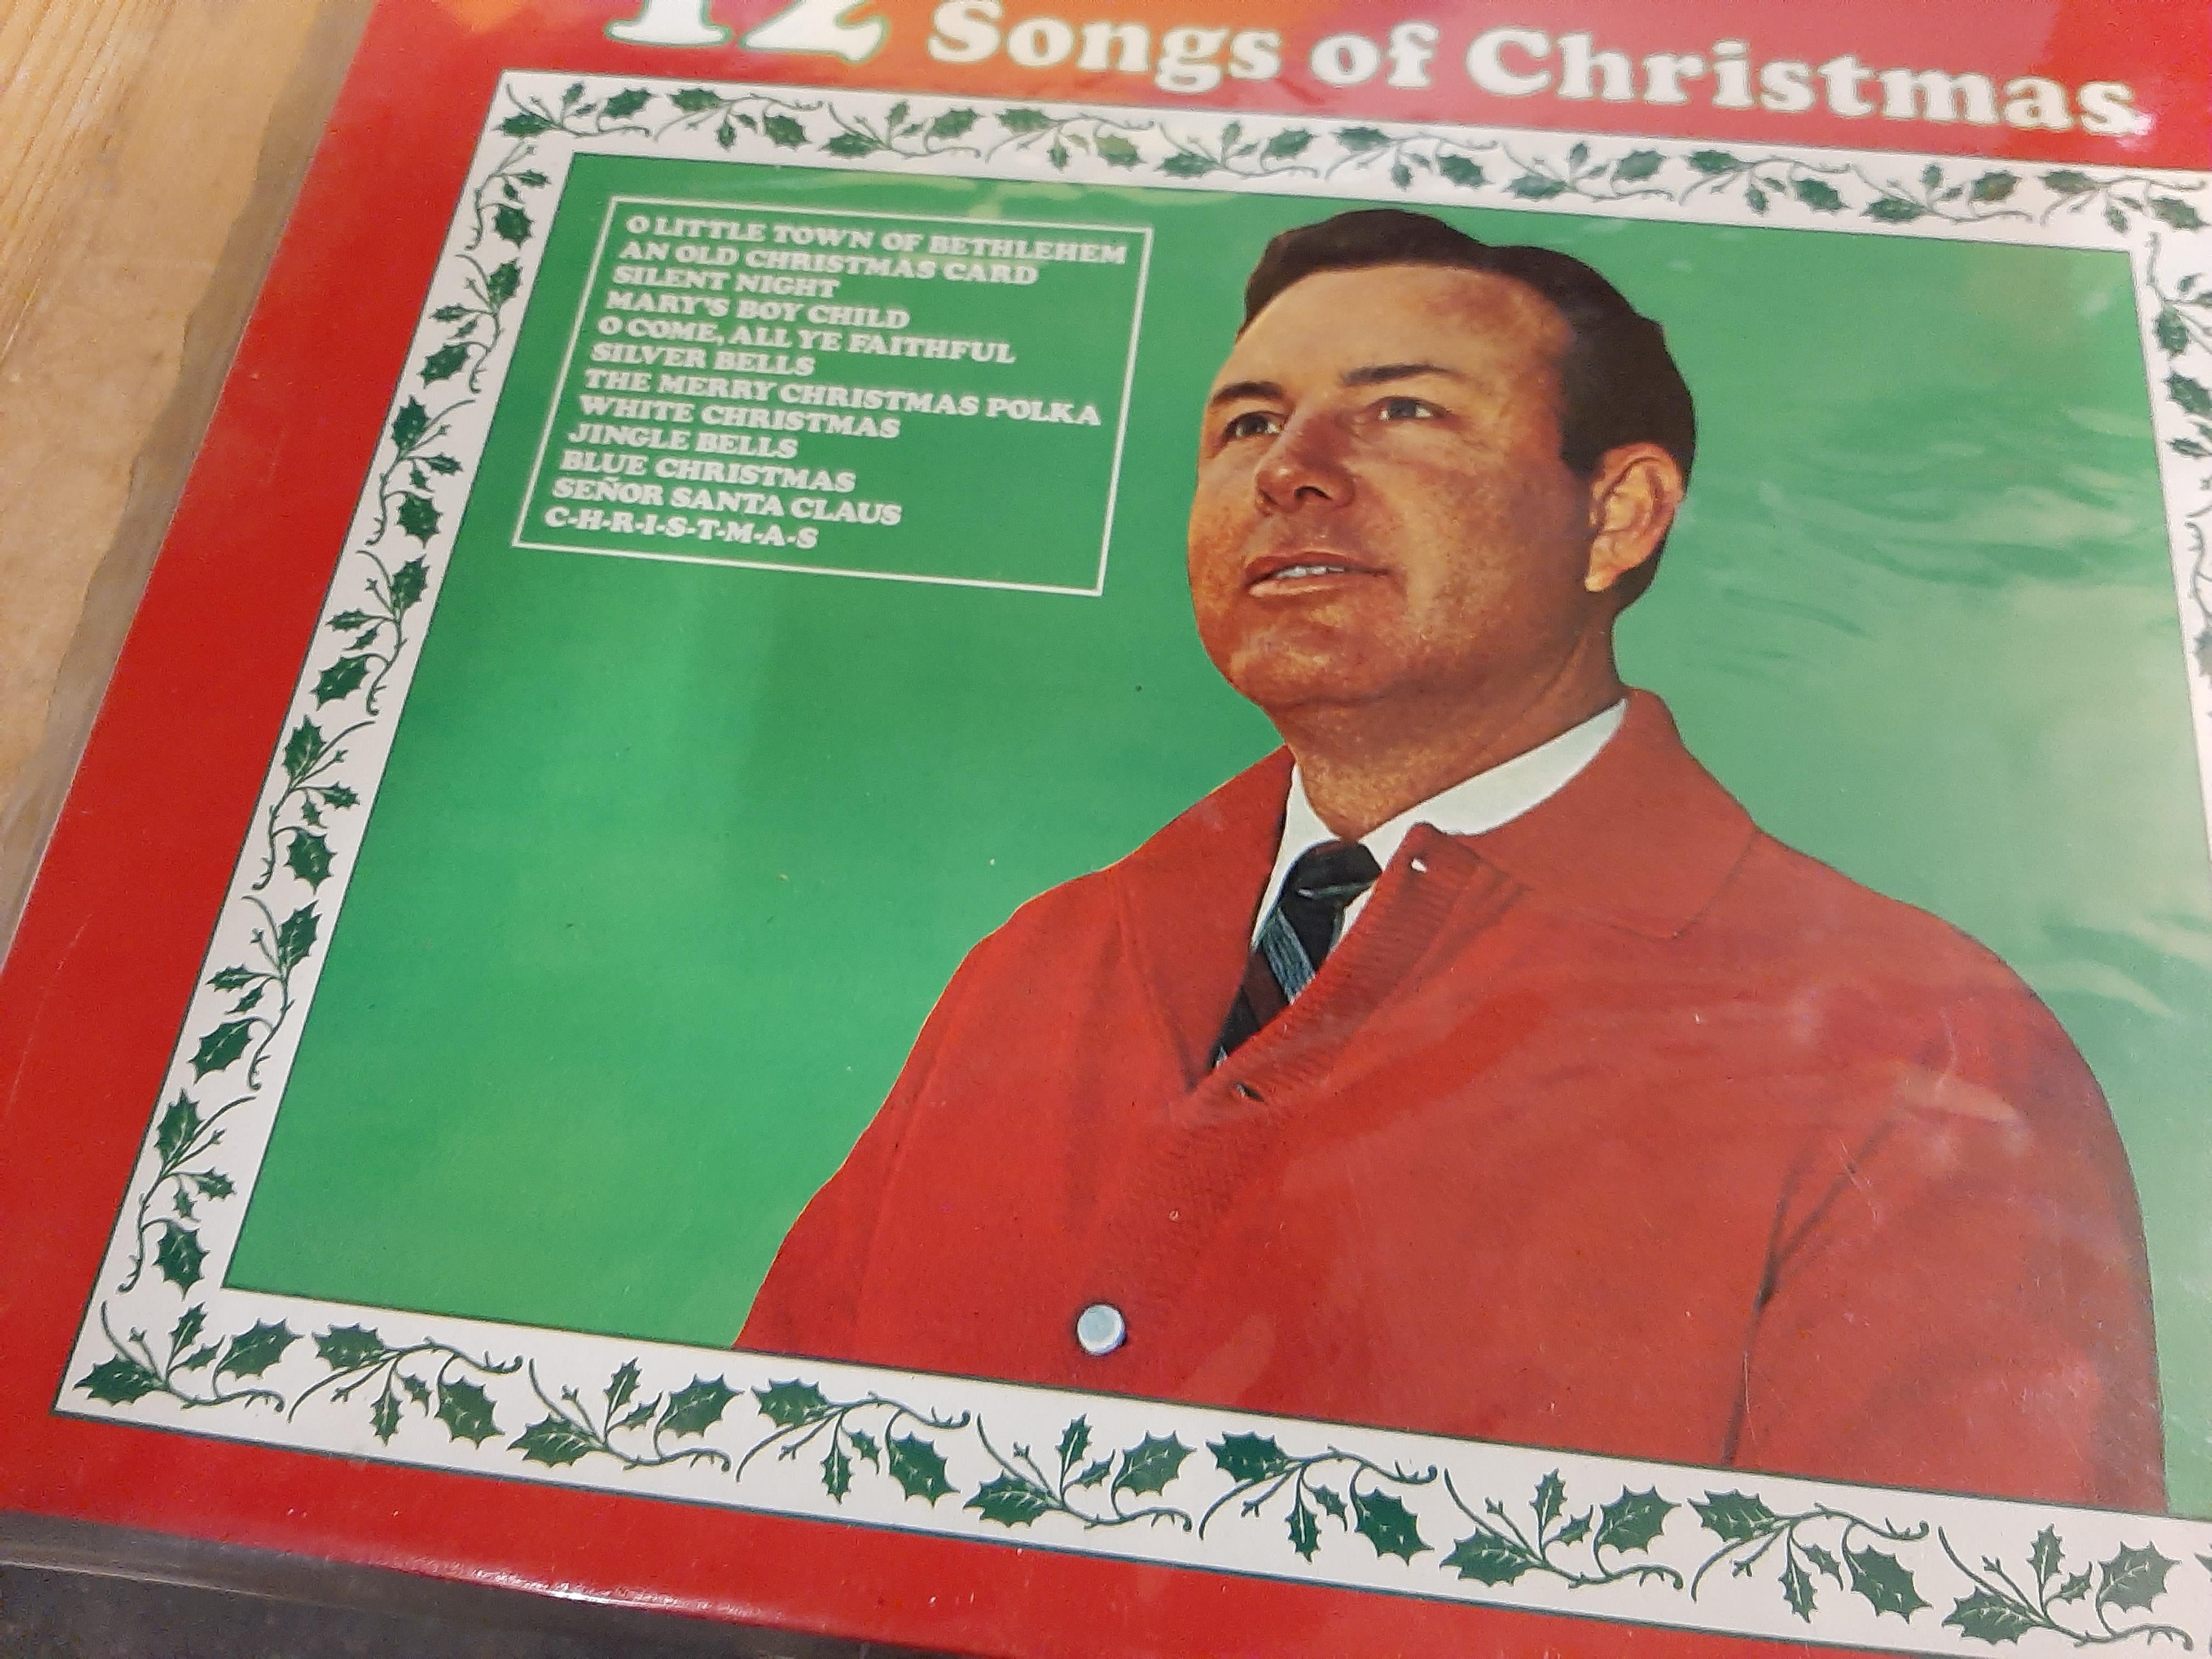 3 Vinyl Records: LPs, viz Russ Conway "Piano Requests", Jim Reeves "12 Songs of Chriostmas" and " - Image 4 of 4